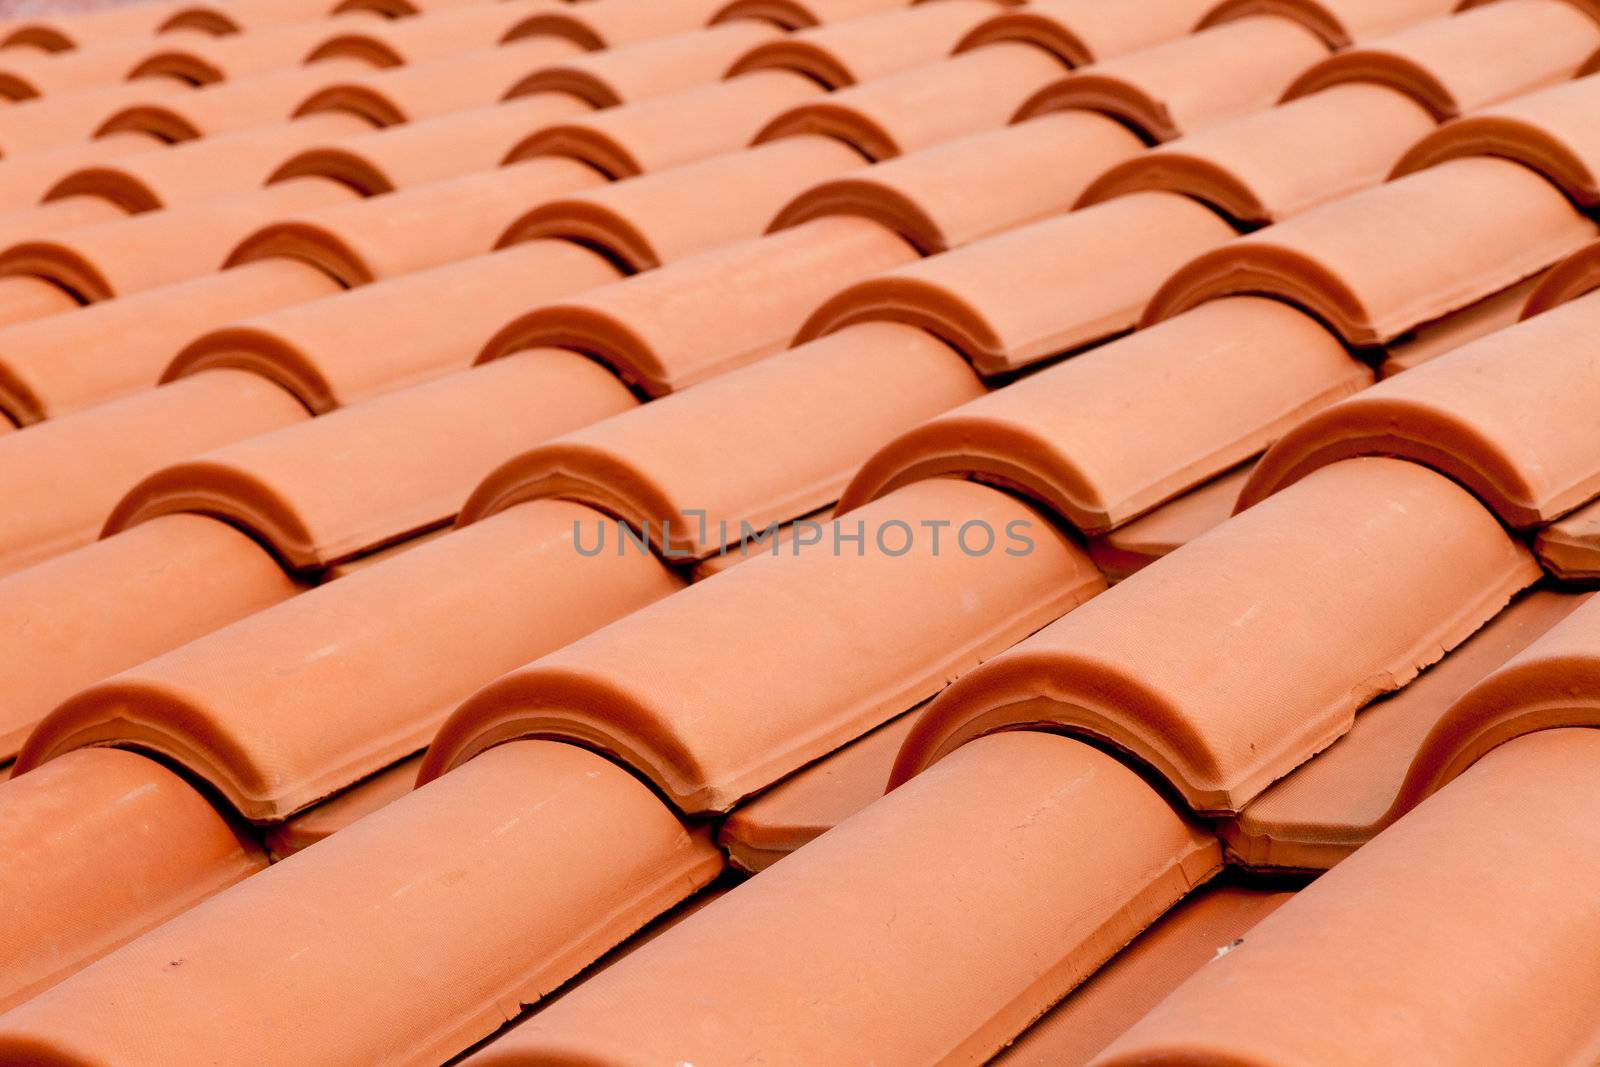 Background texture pattern of red ceramic roof shingles